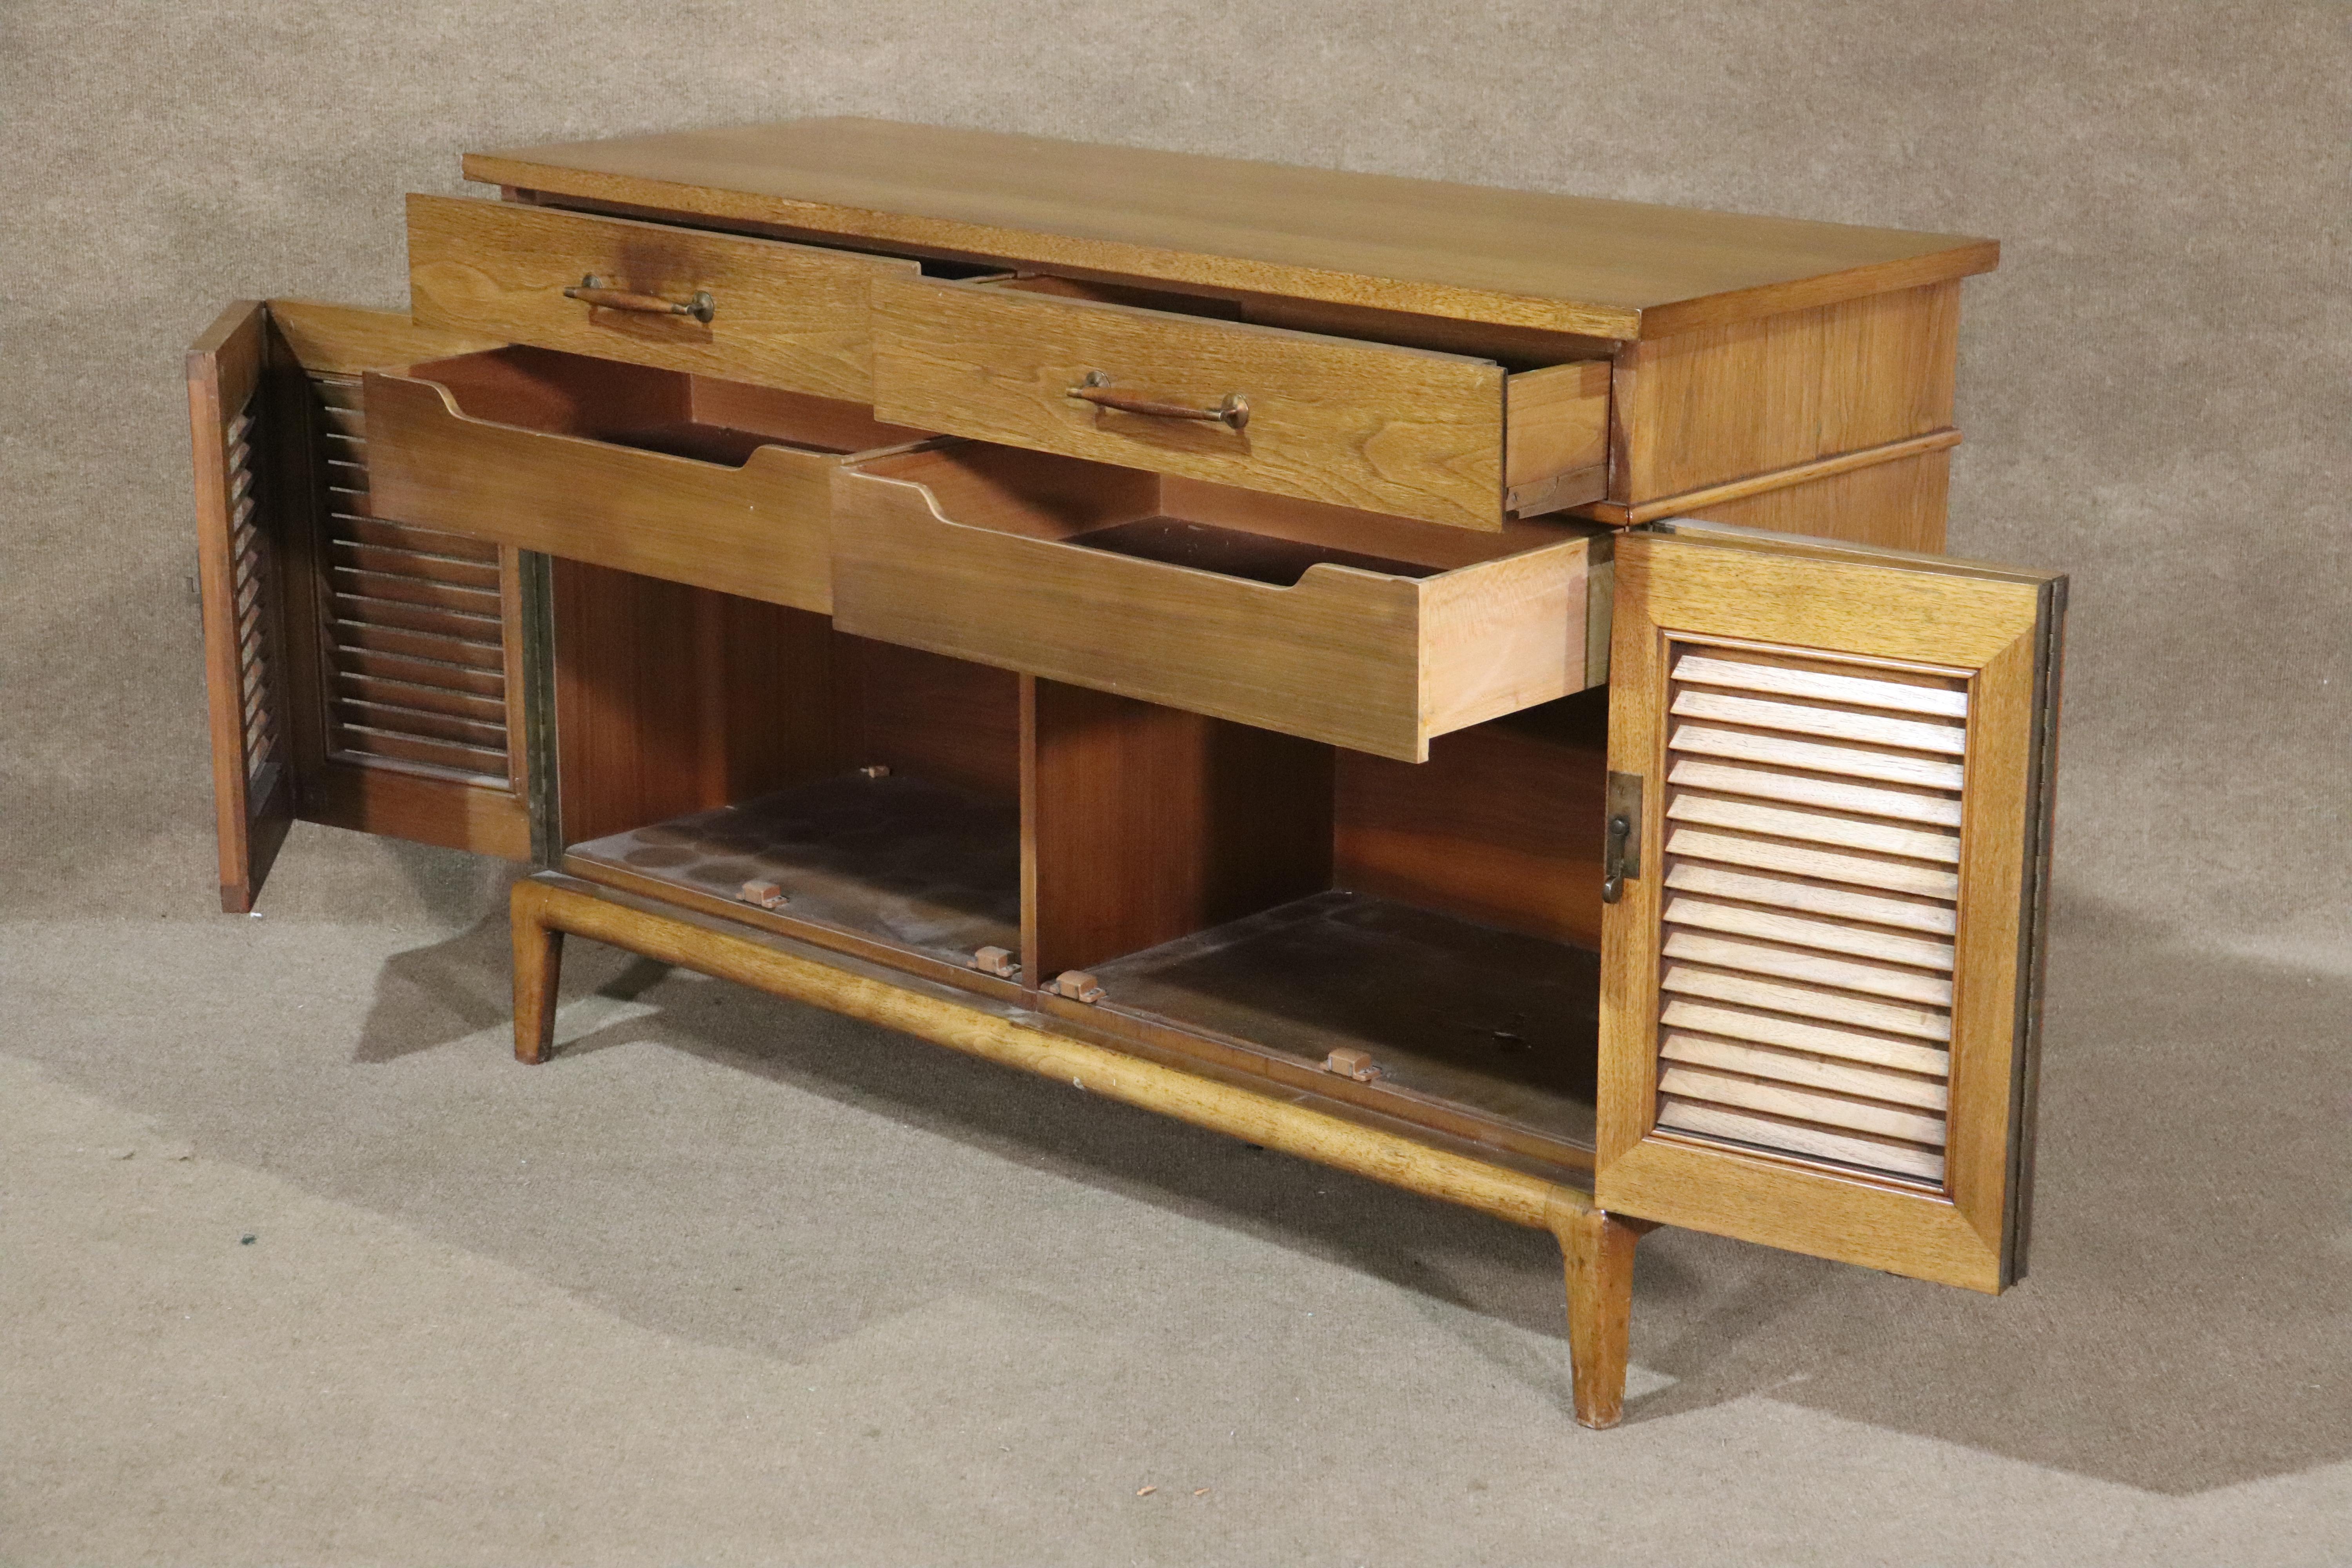 Low cabinet by Henredon for their 'Circa 60' line. Features louvered doors, four drawers, and drop down drawer option for serving.
Please confirm location NY or NJ